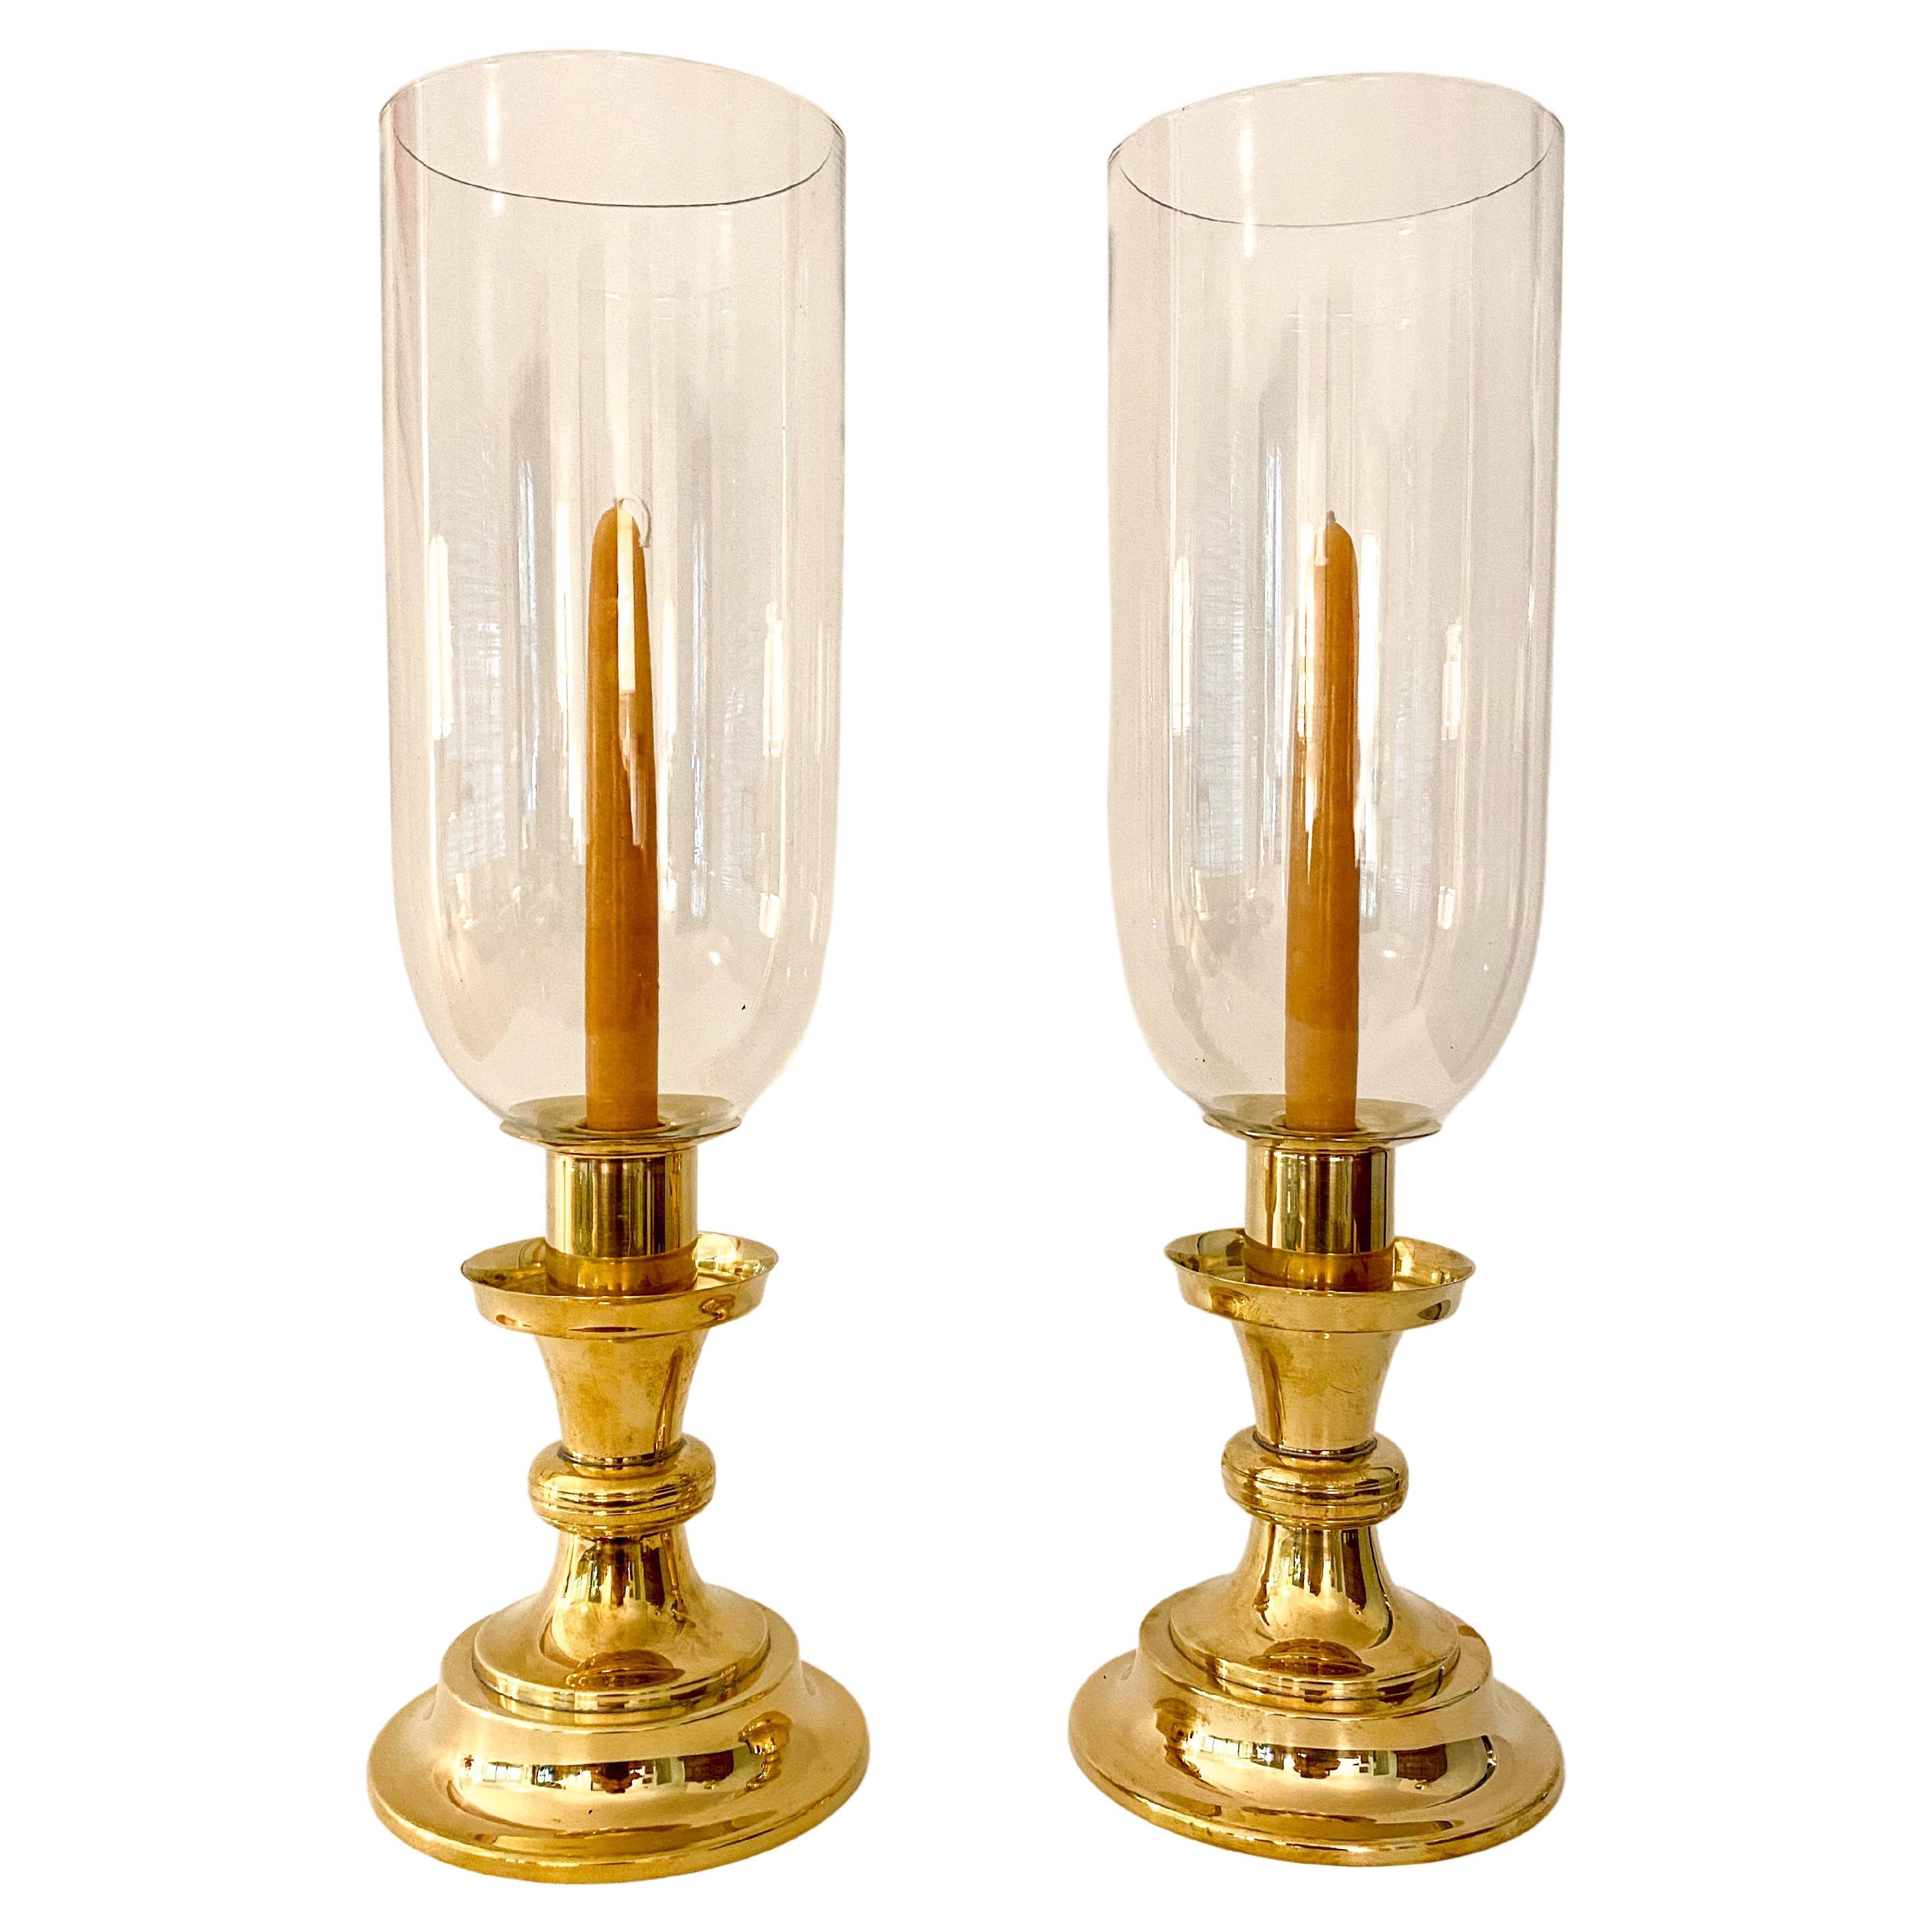 Pair of Candlesticks with Hurricanes Designed by Tommi Parzinger for Dorlyn